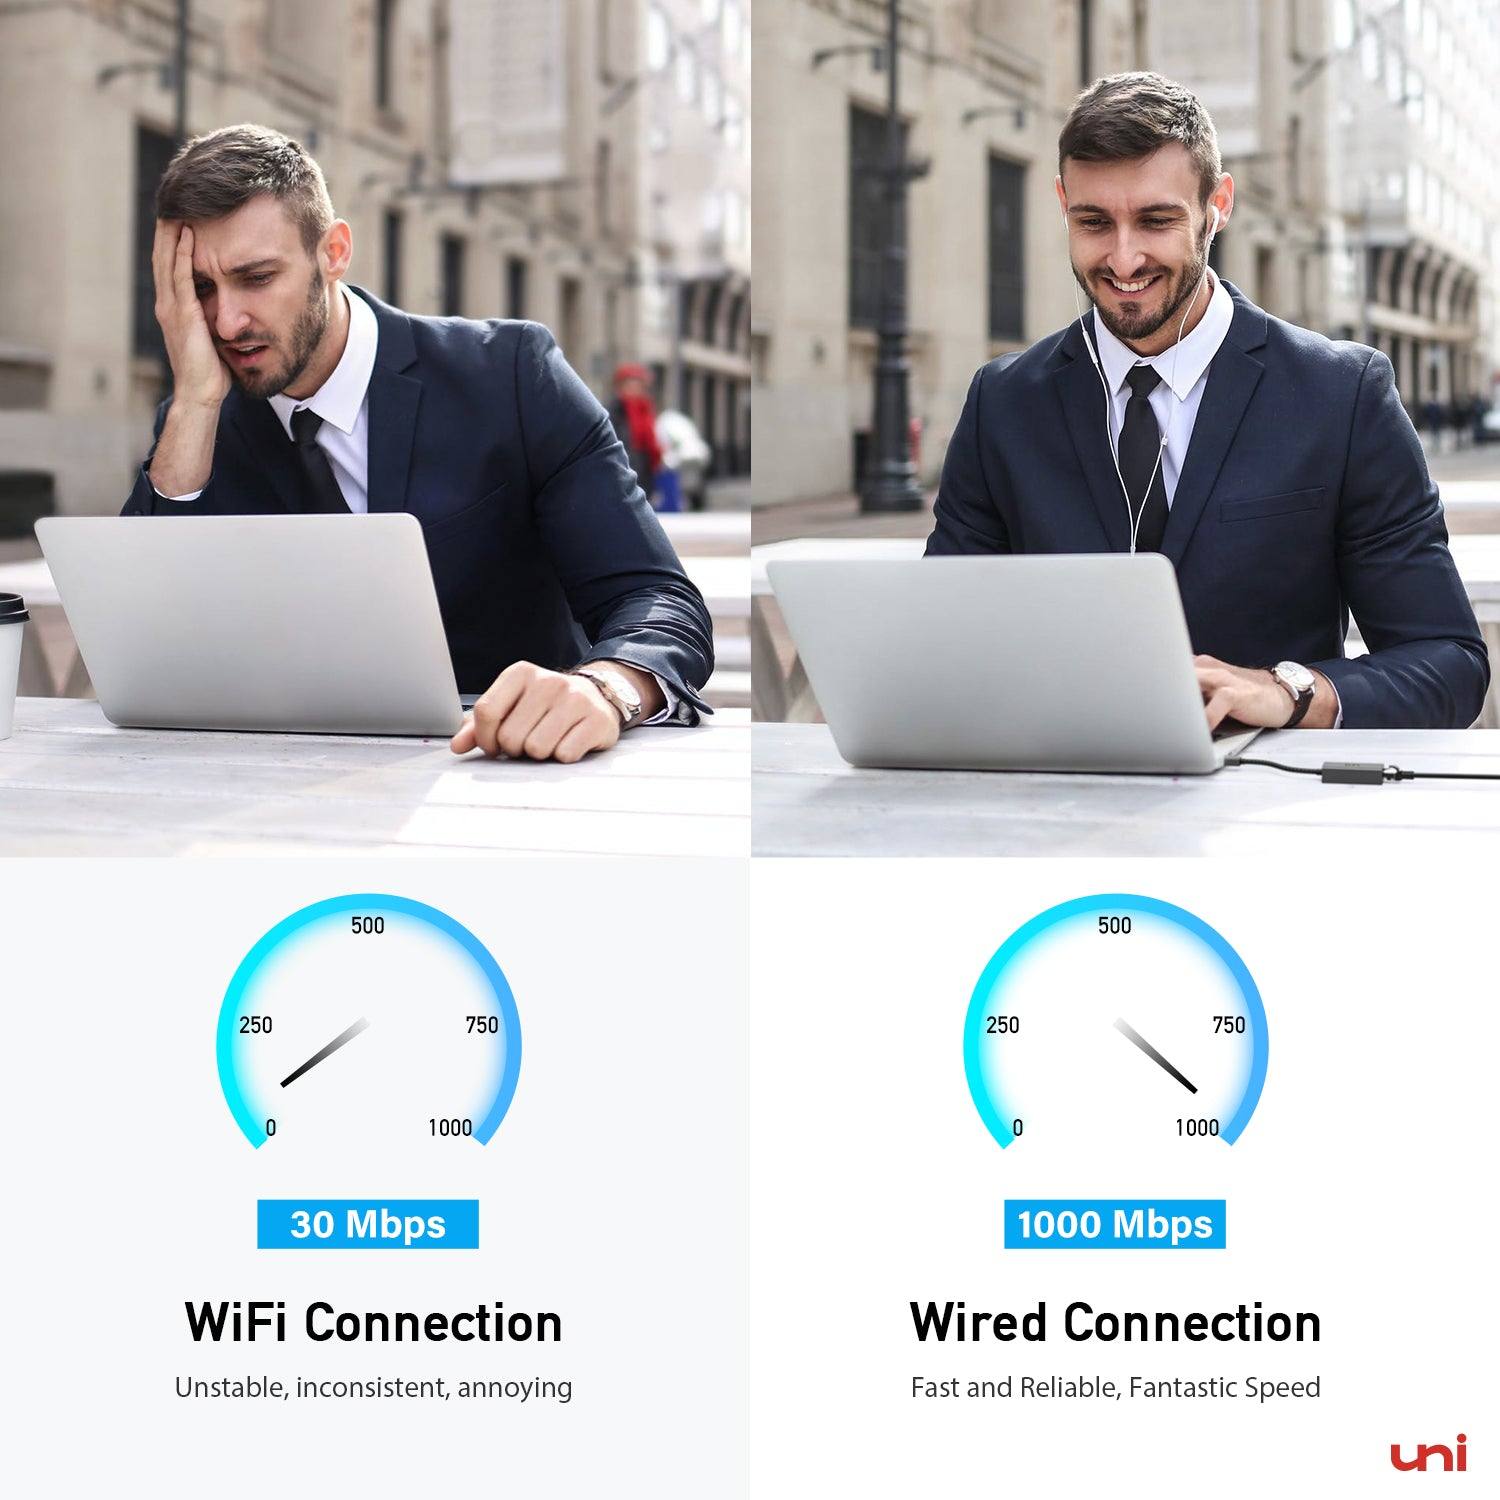  A reliable Gigabit connection when wireless connectivity is inconsistent or weak | uni